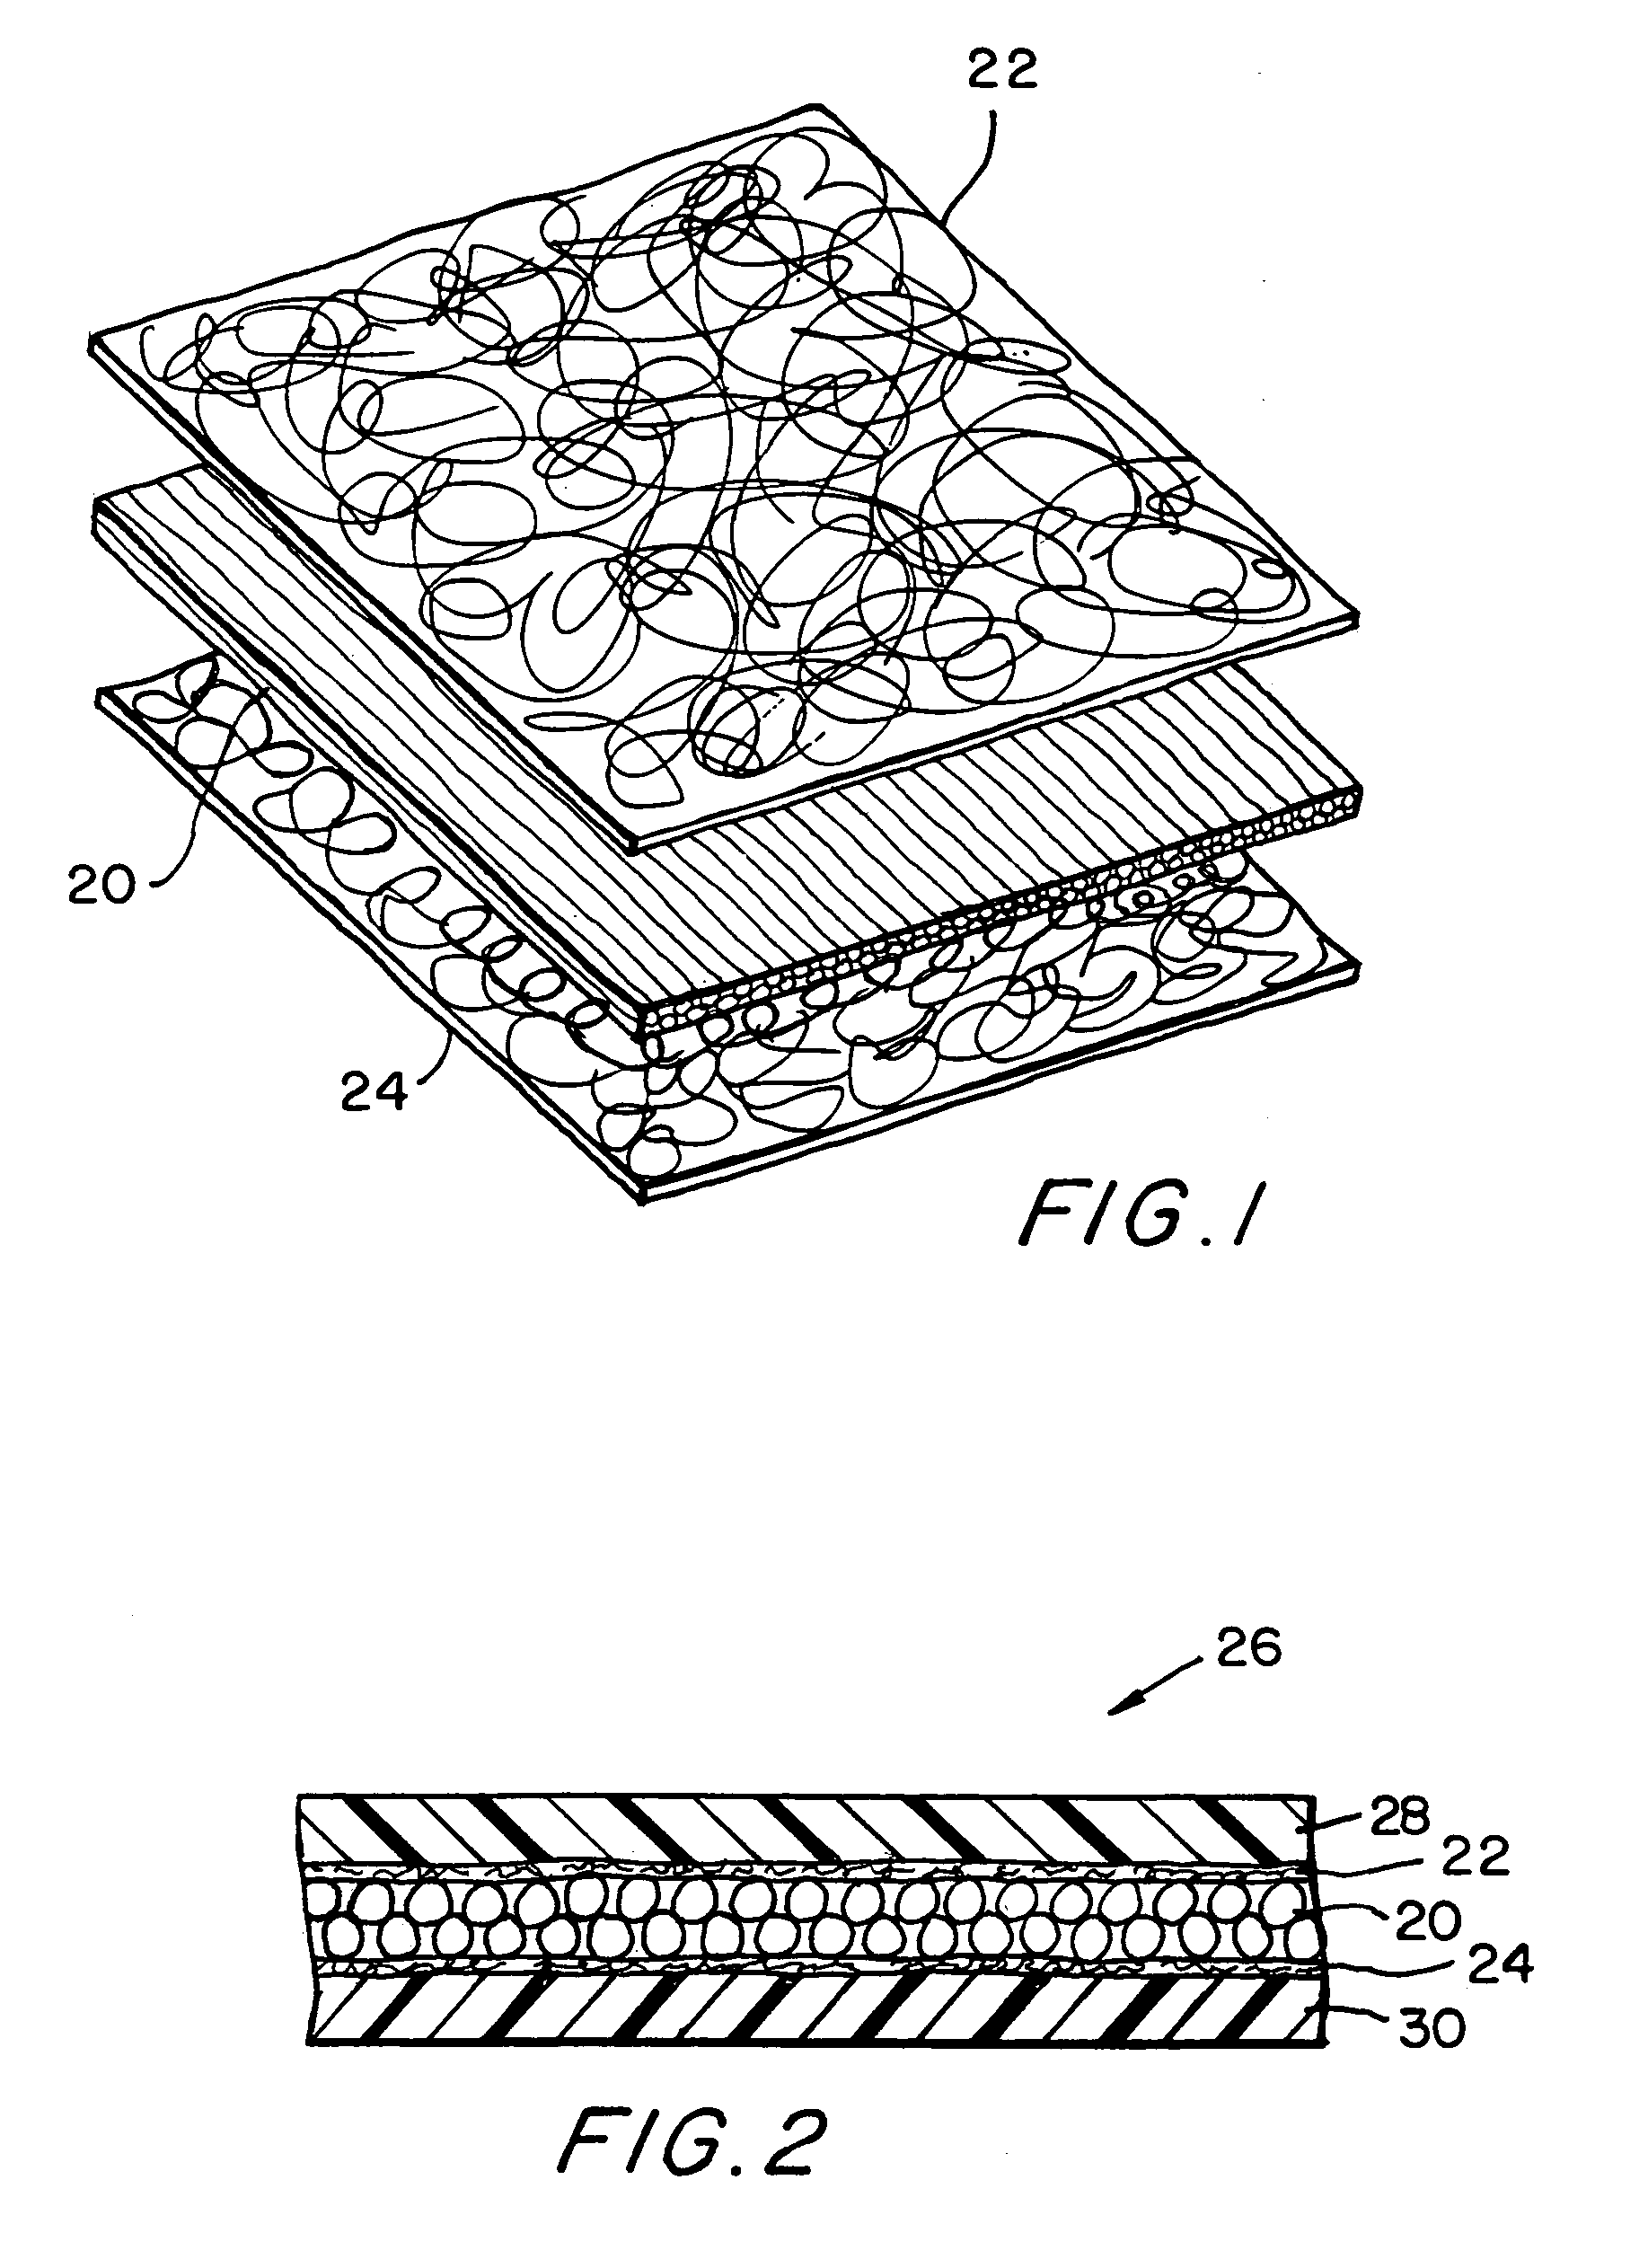 Composite carbon fiber material and method of making same